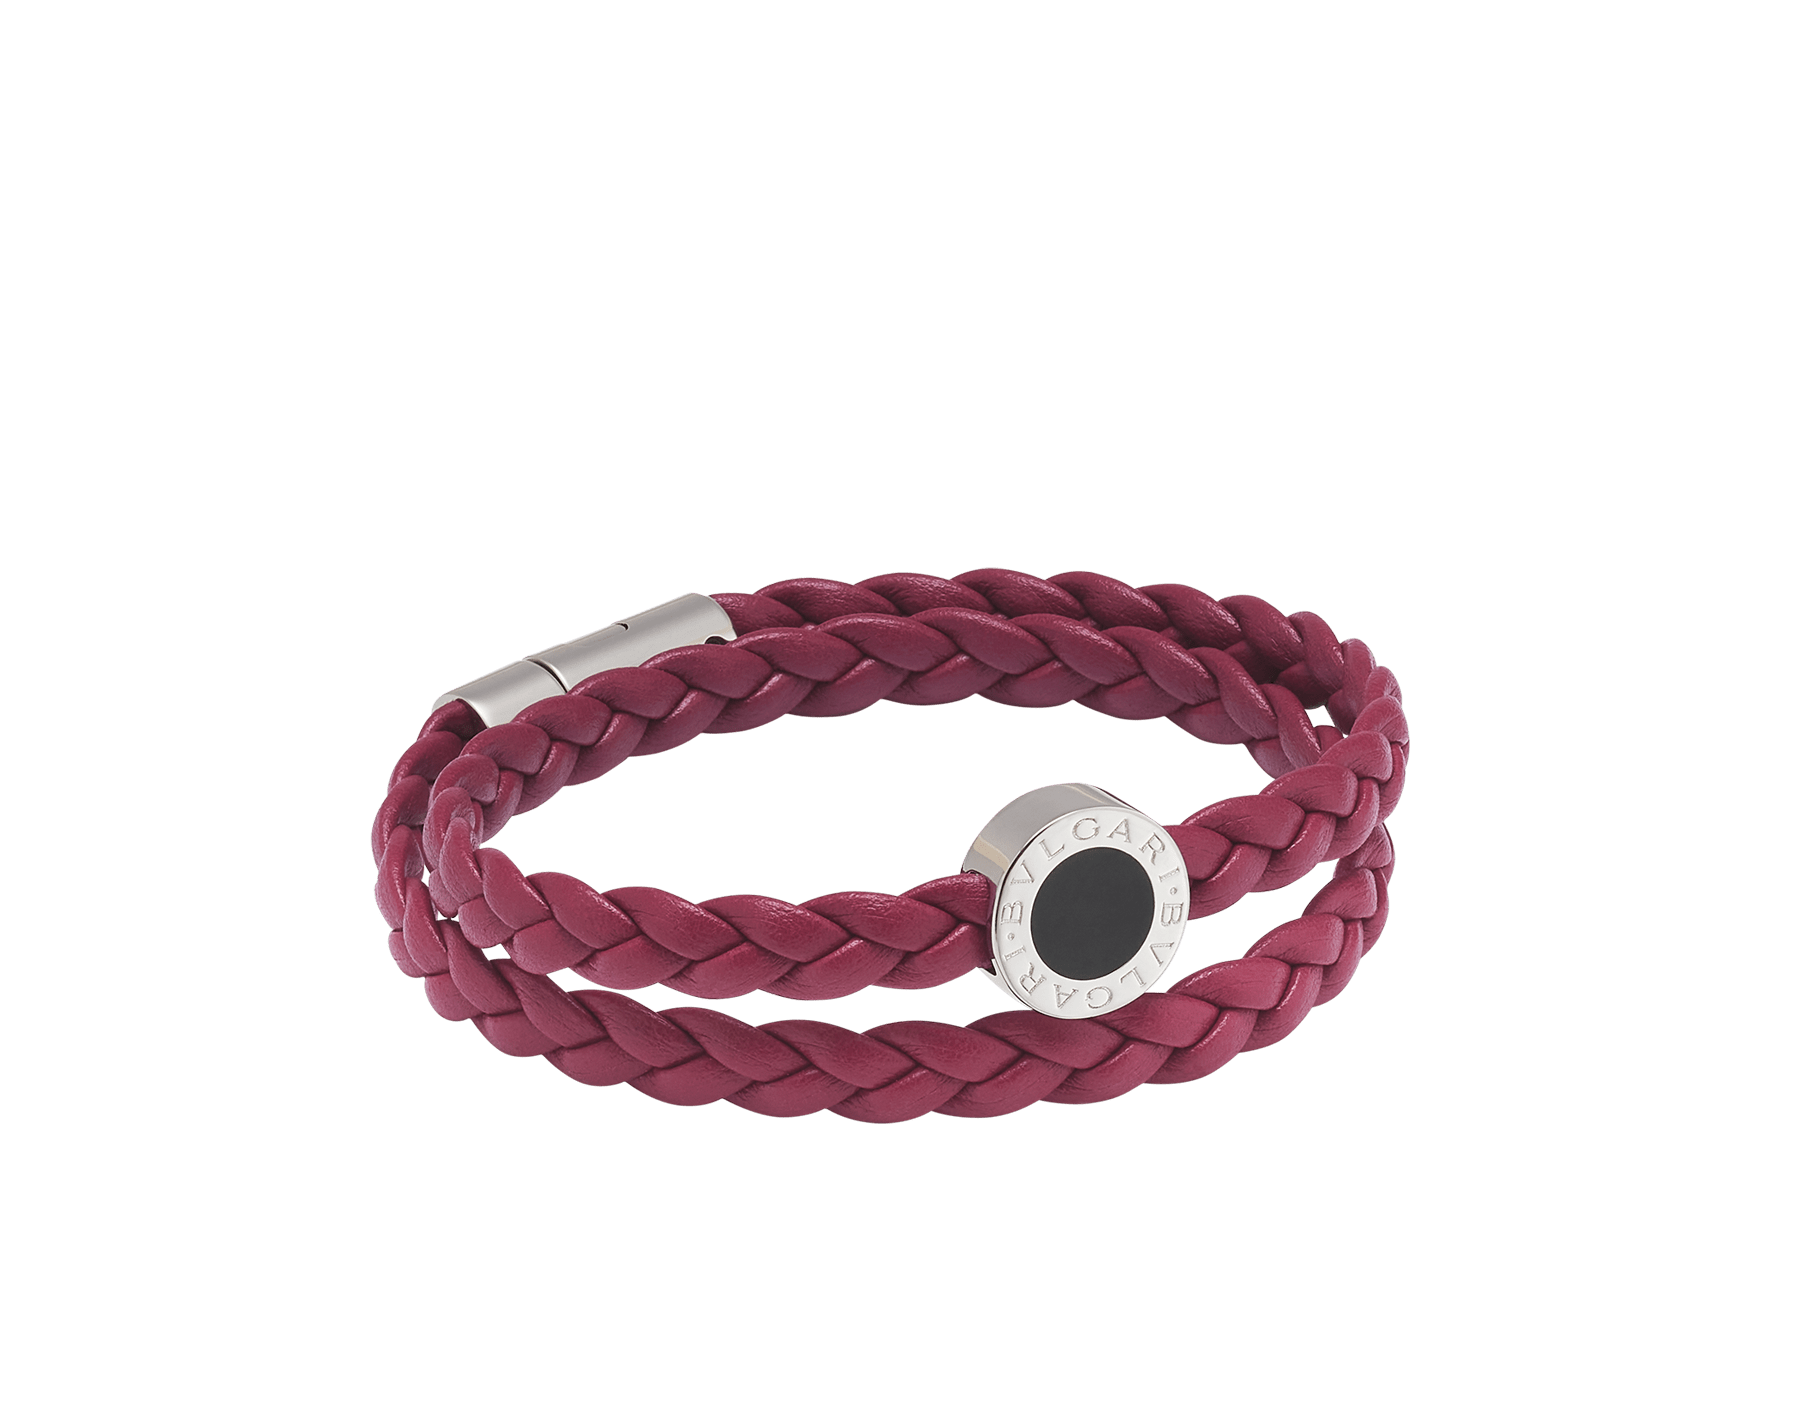 BULGARI BULGARI Man bracelet in anemone spinel pinkish red braided calf leather with palladium-plated brass clasp closure. Iconic décor in palladium-plated brass embellished with matte black enamel. LOGOBRAID-WCL-AS image 1